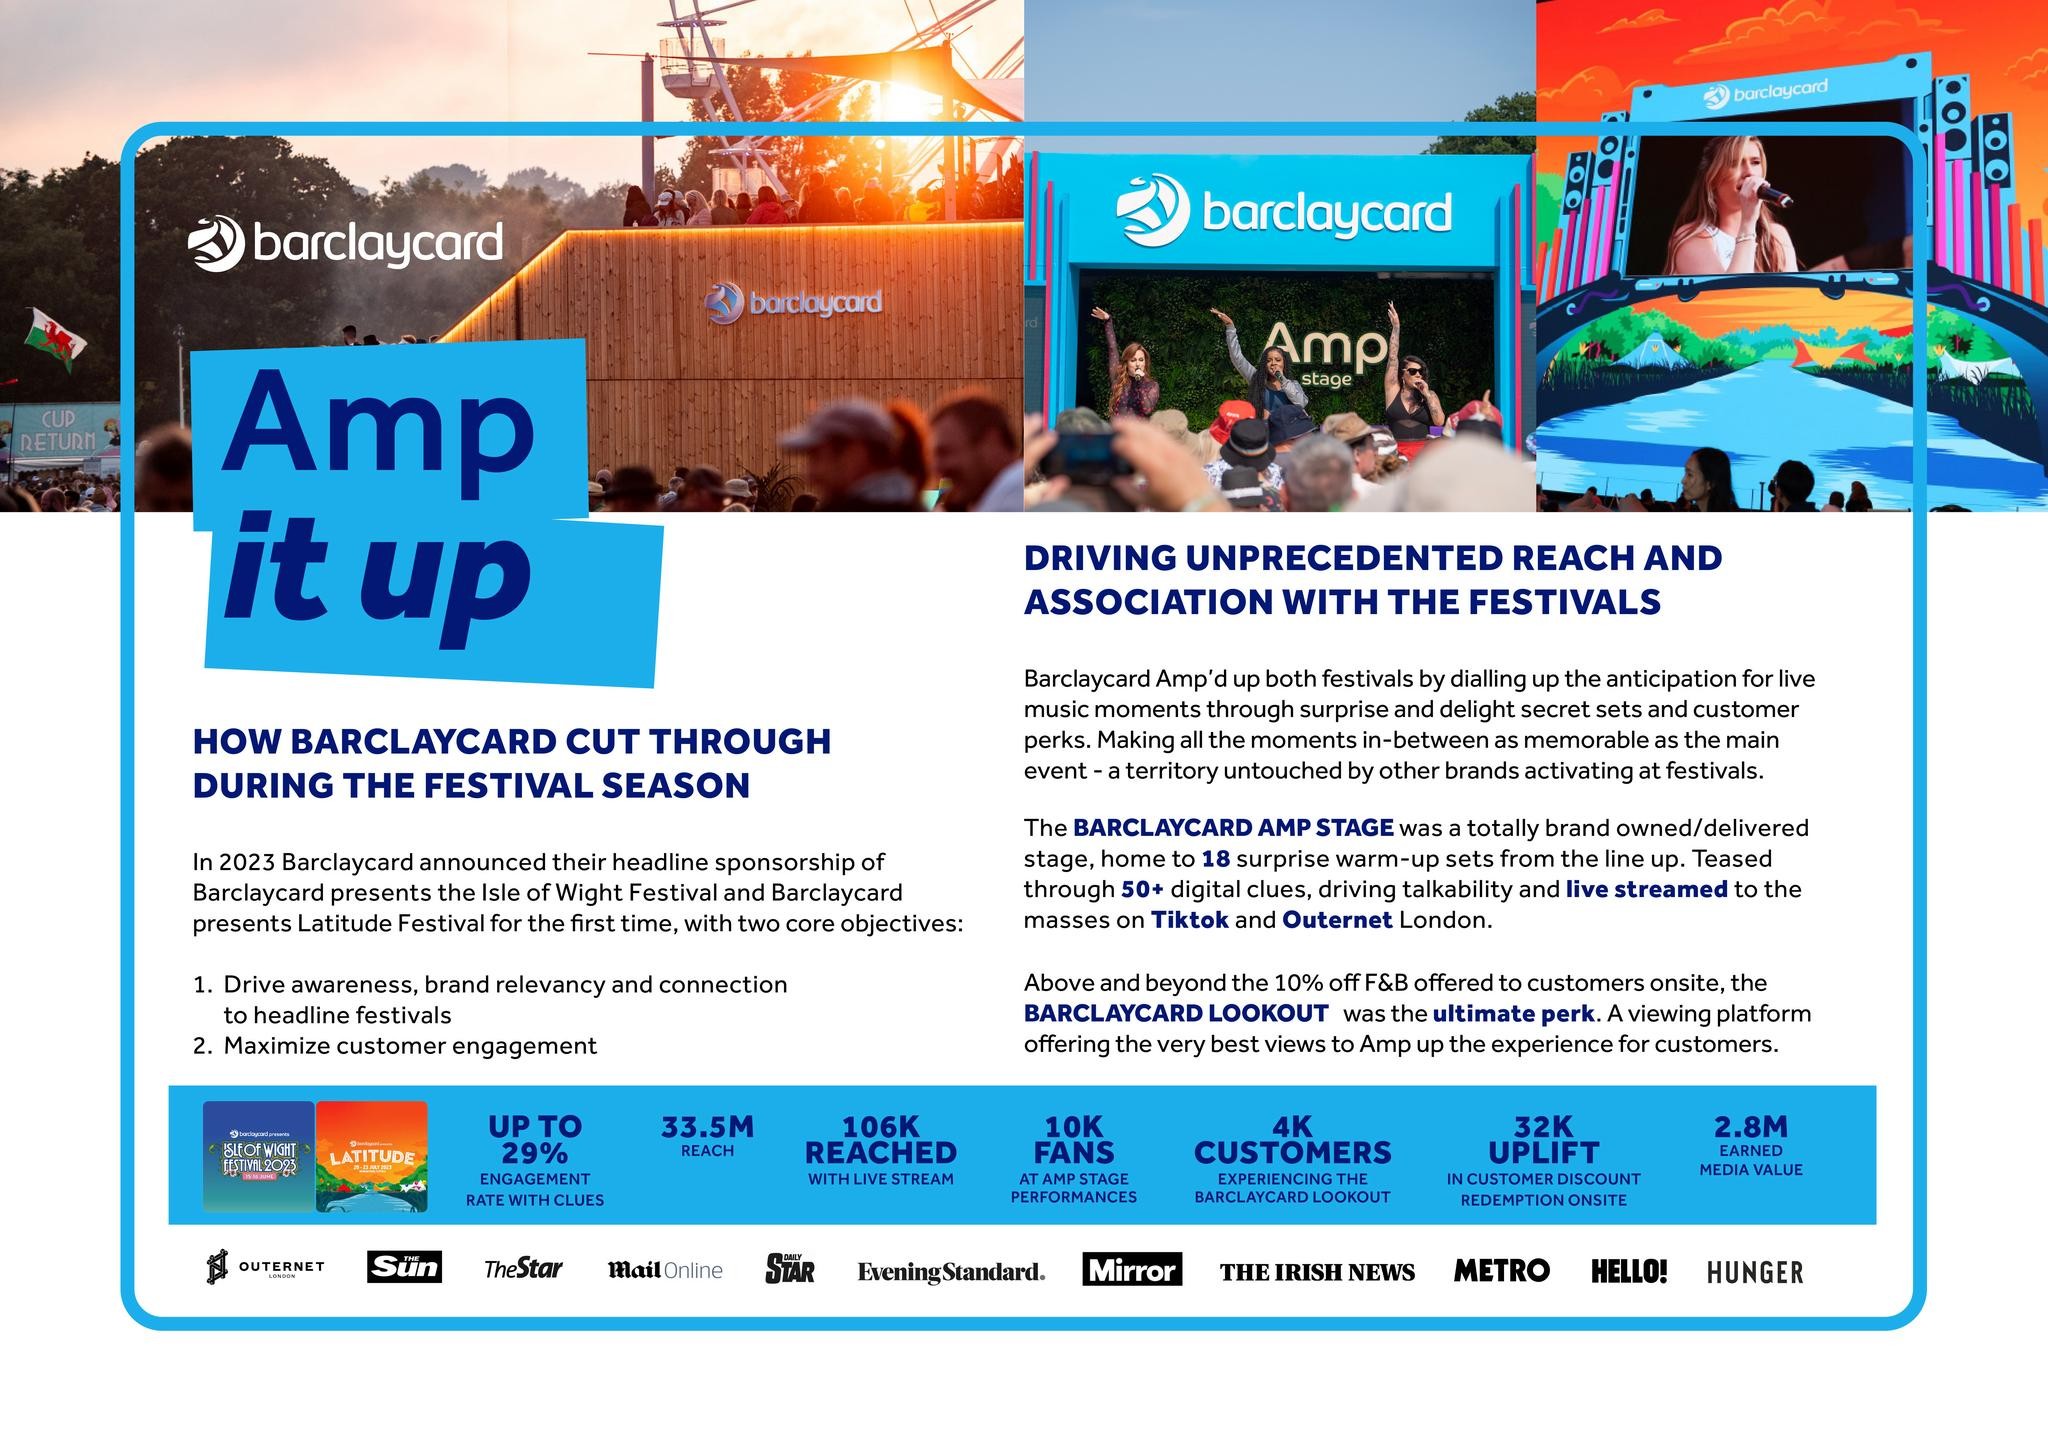 Barclaycard Amp it up 2023 - Brand Experience and Activation